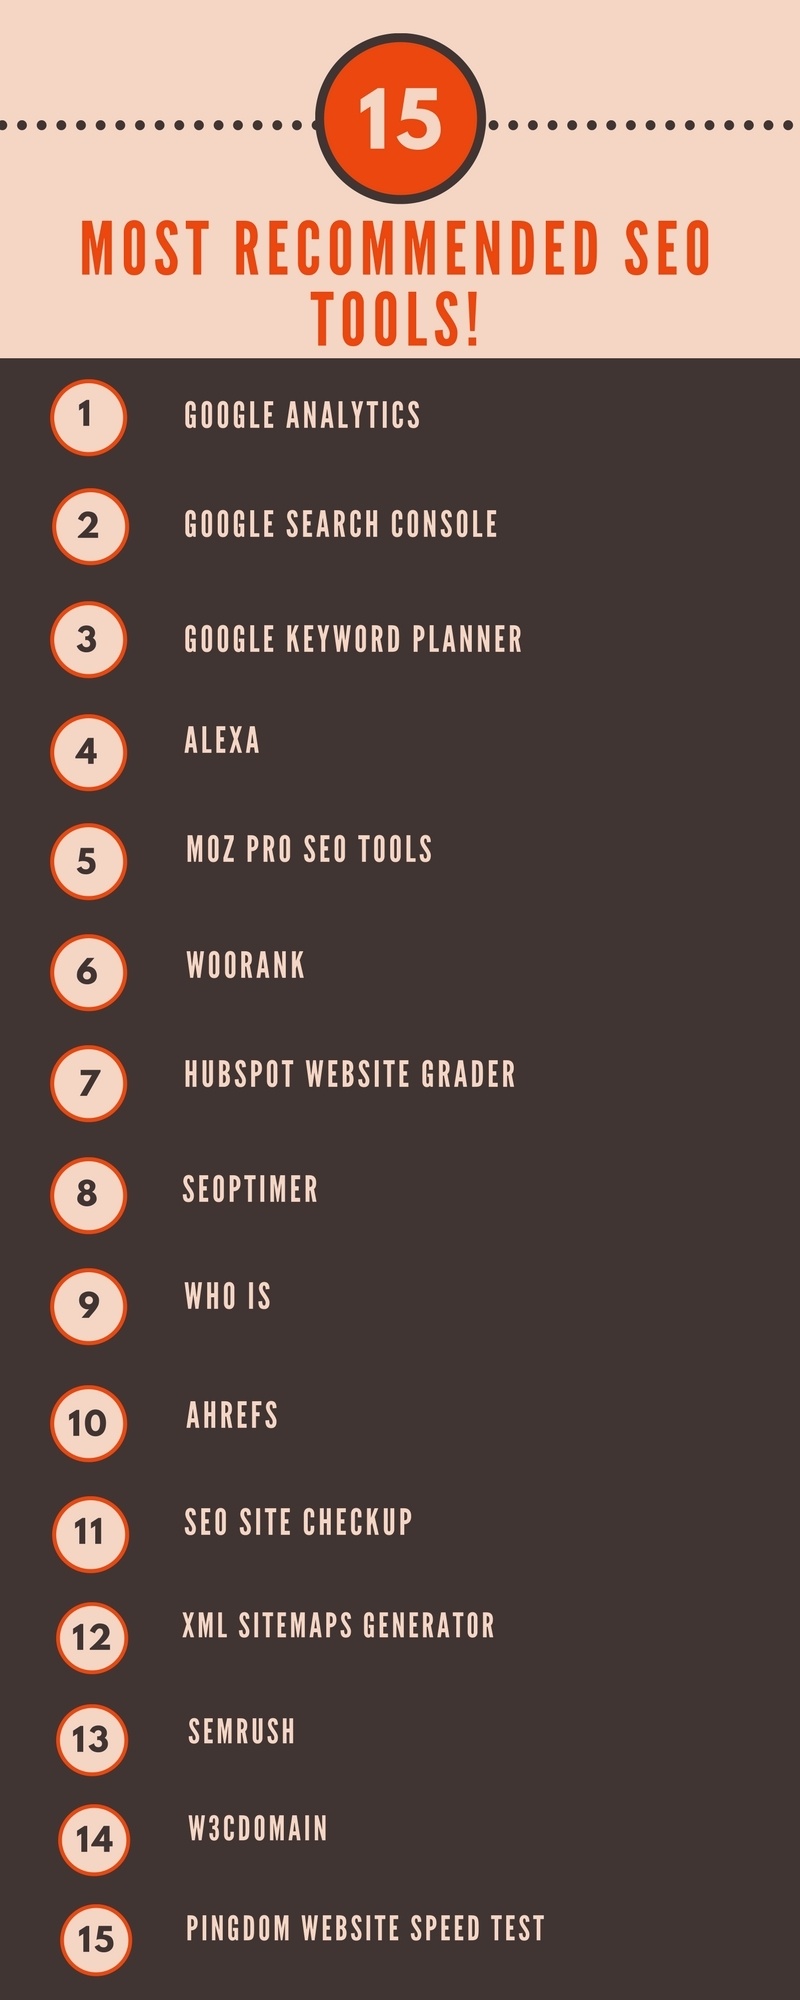 Top 15 Most Recommended SEO Tools Infographic